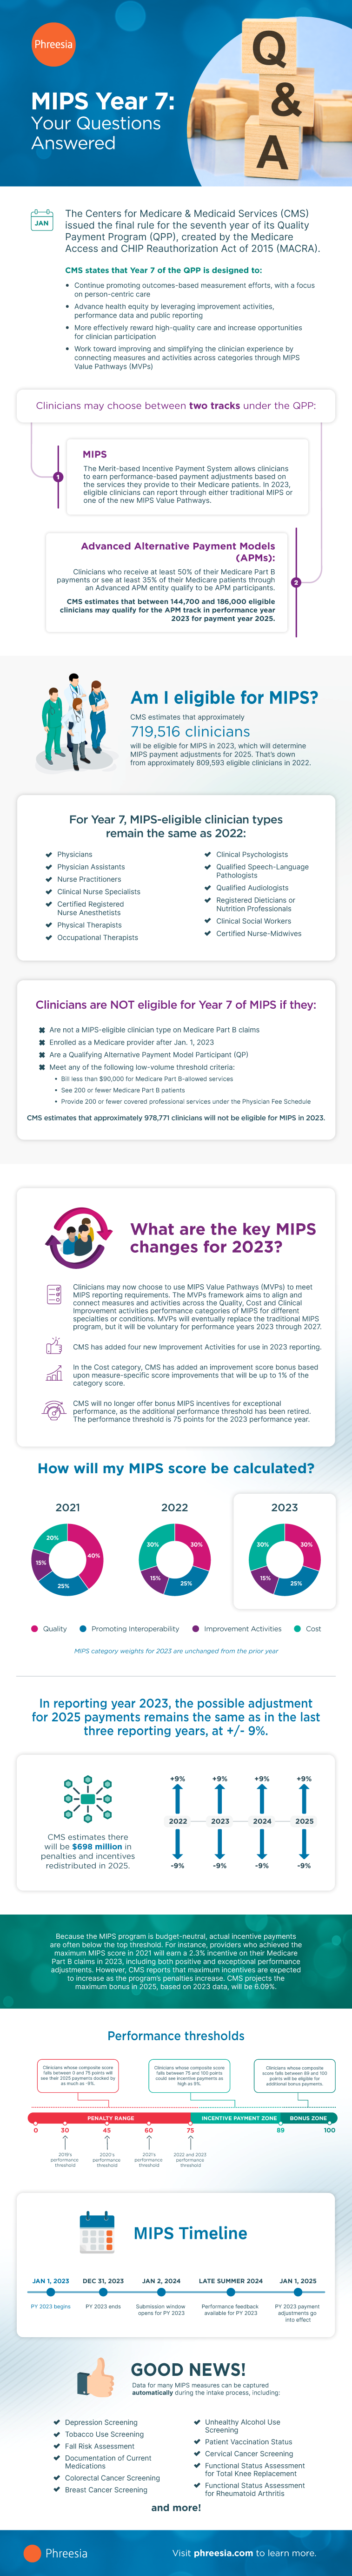 mips year 7 infographic png